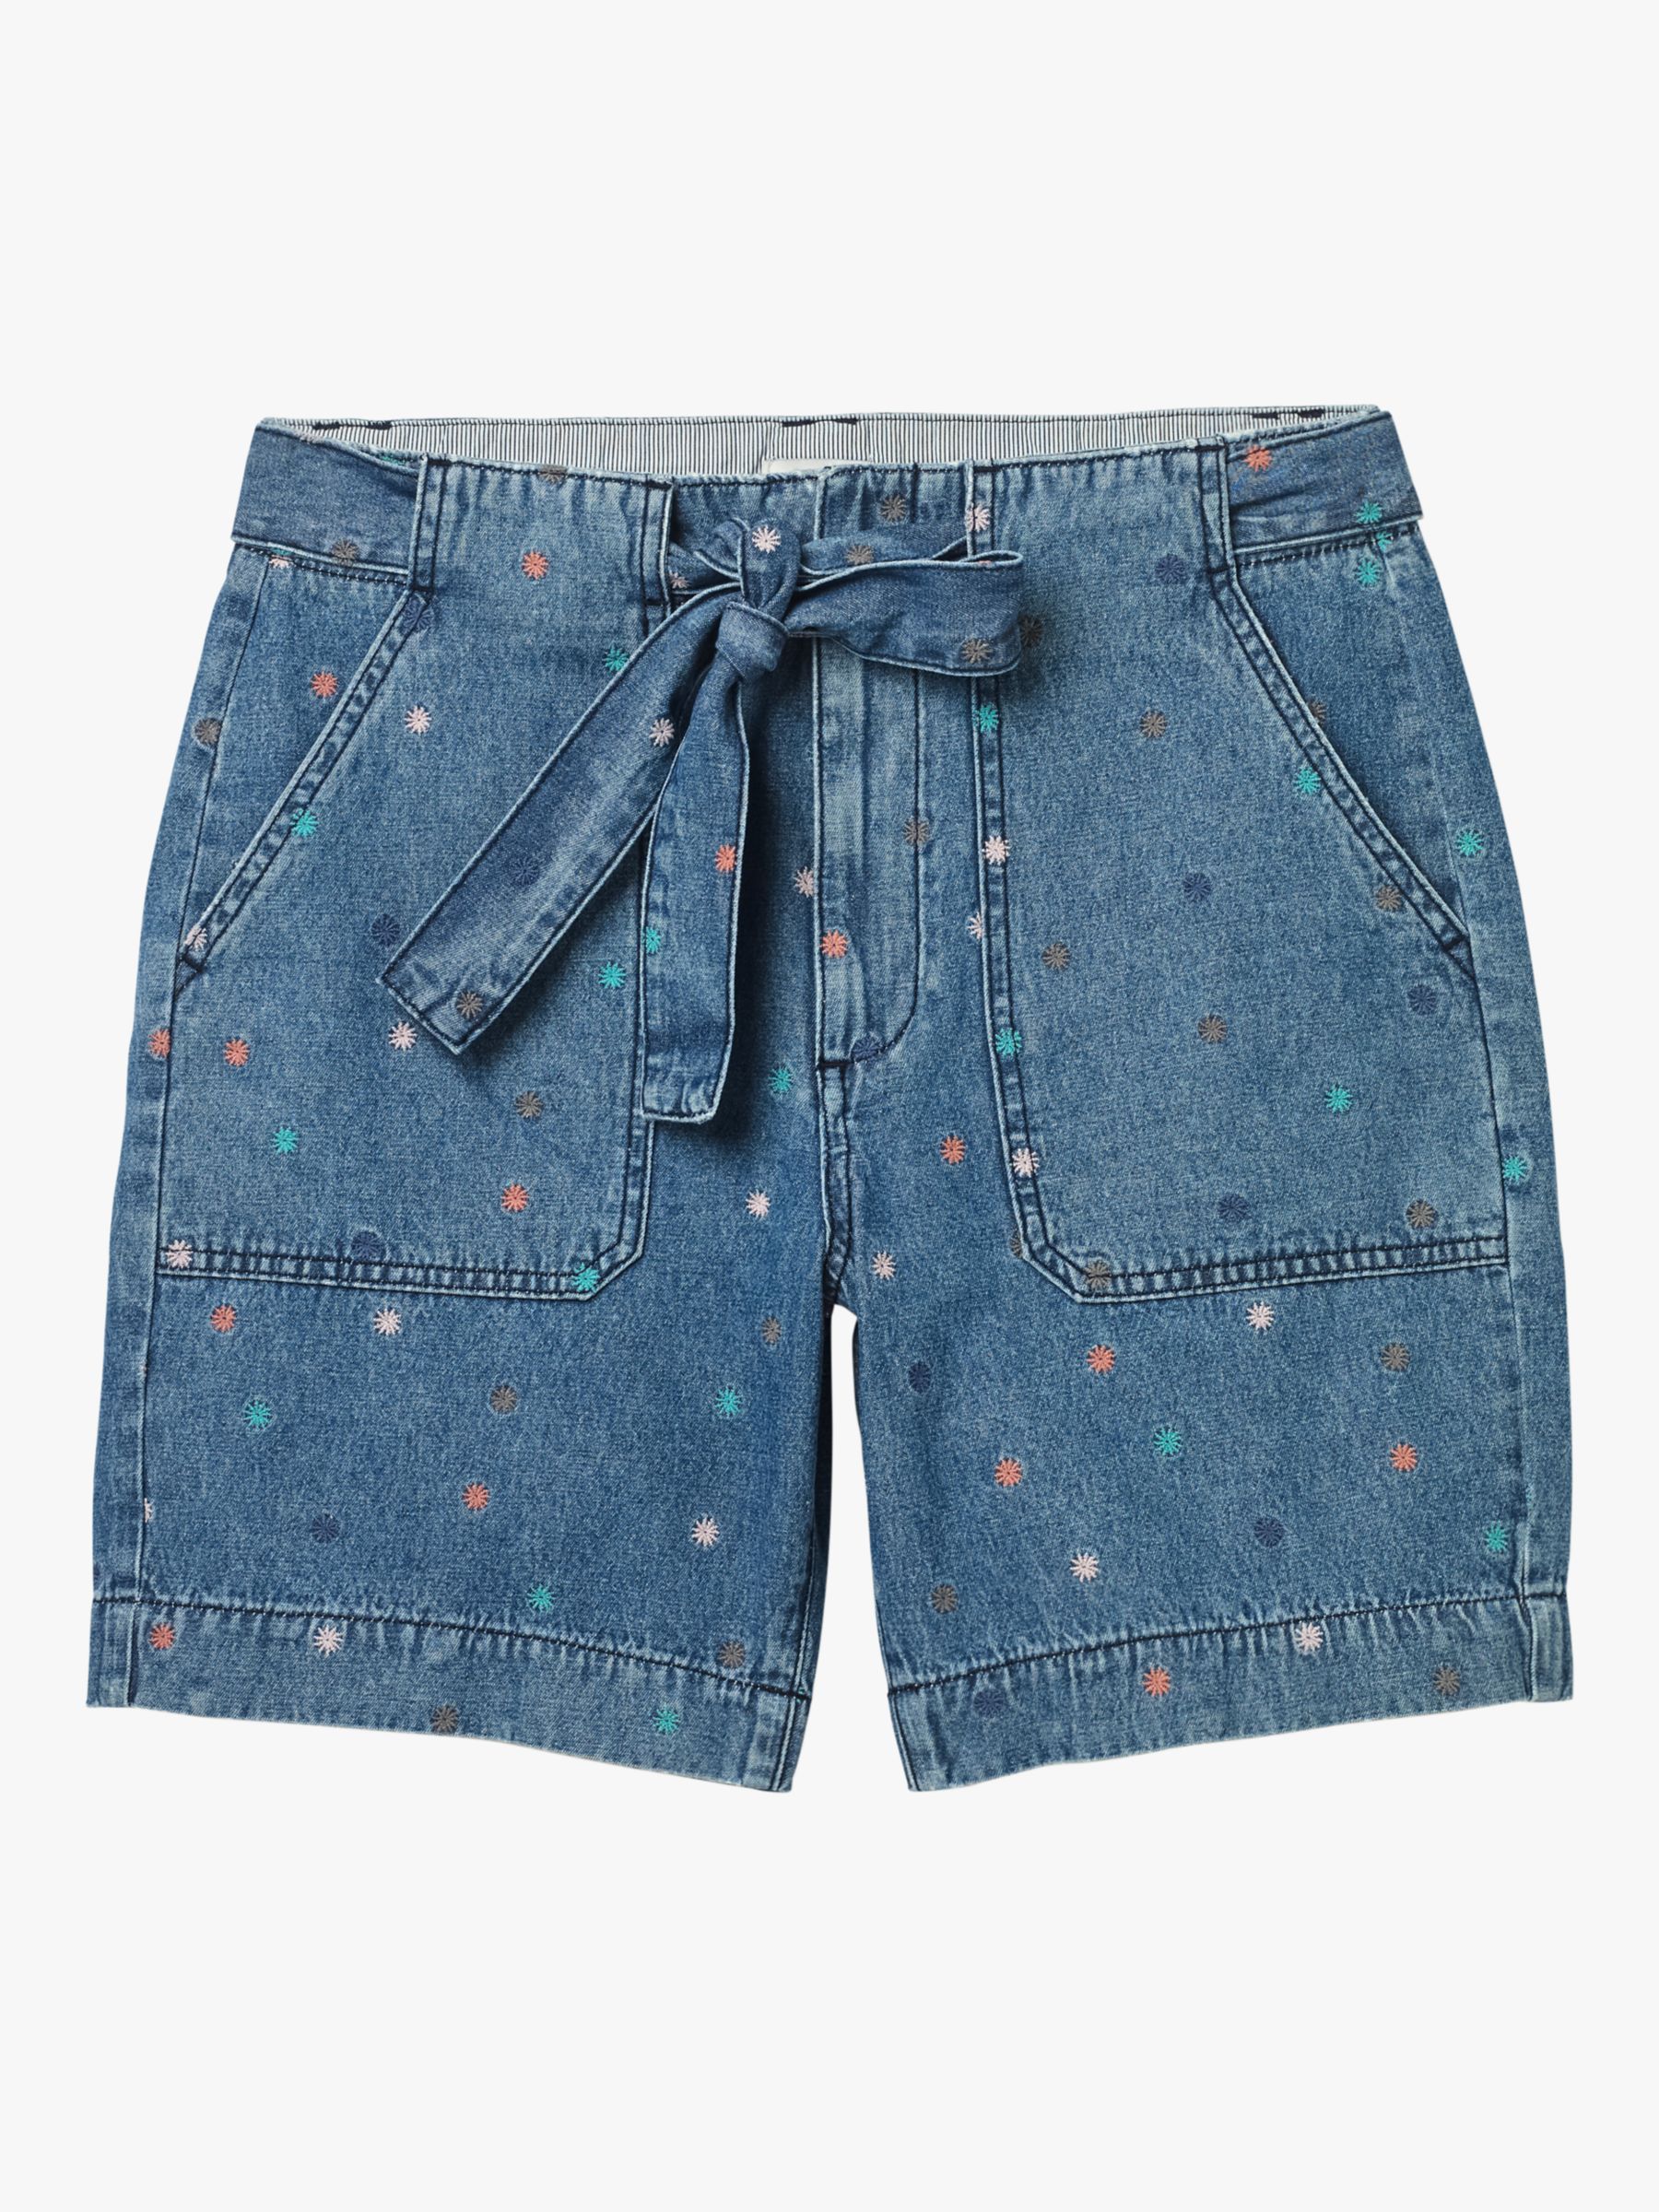 jean shorts with white stars